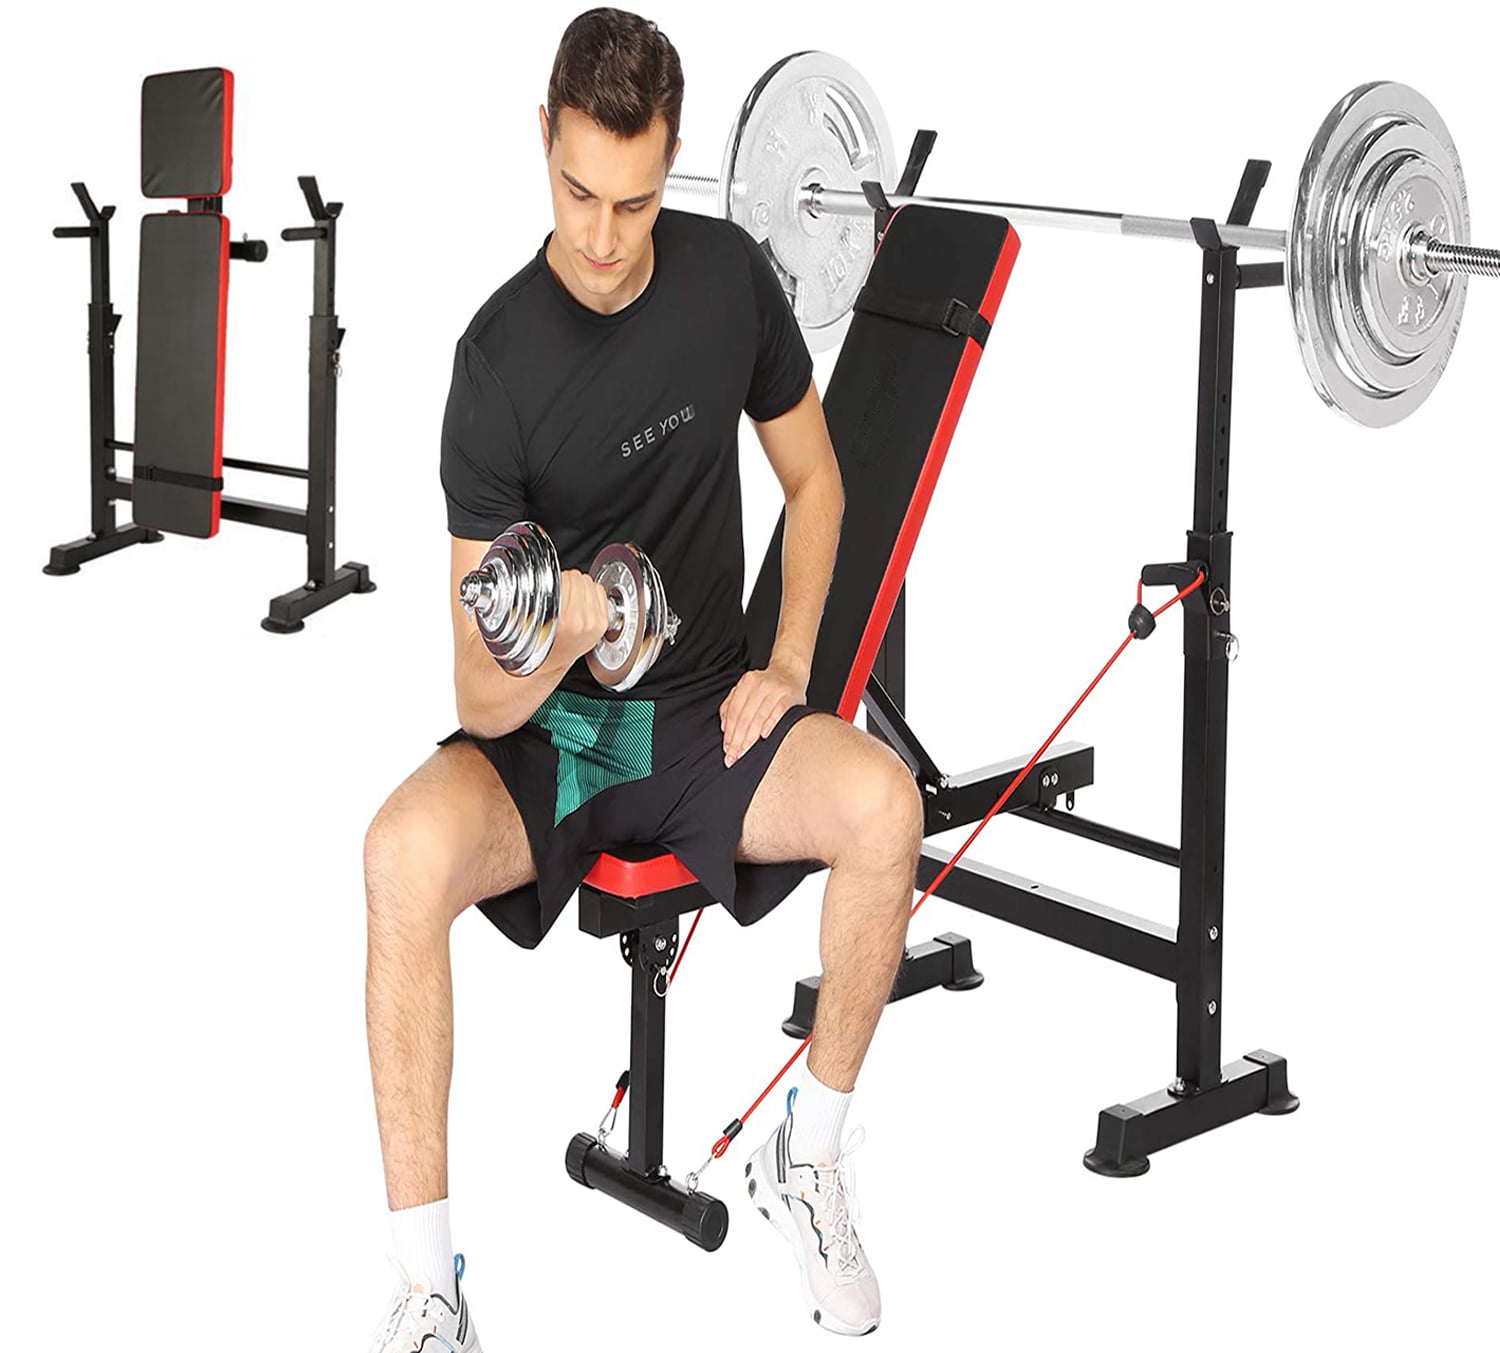 Details about   Bench Press Barbell Rack Adjustable Weight Folding Squat Fitness Gym Training